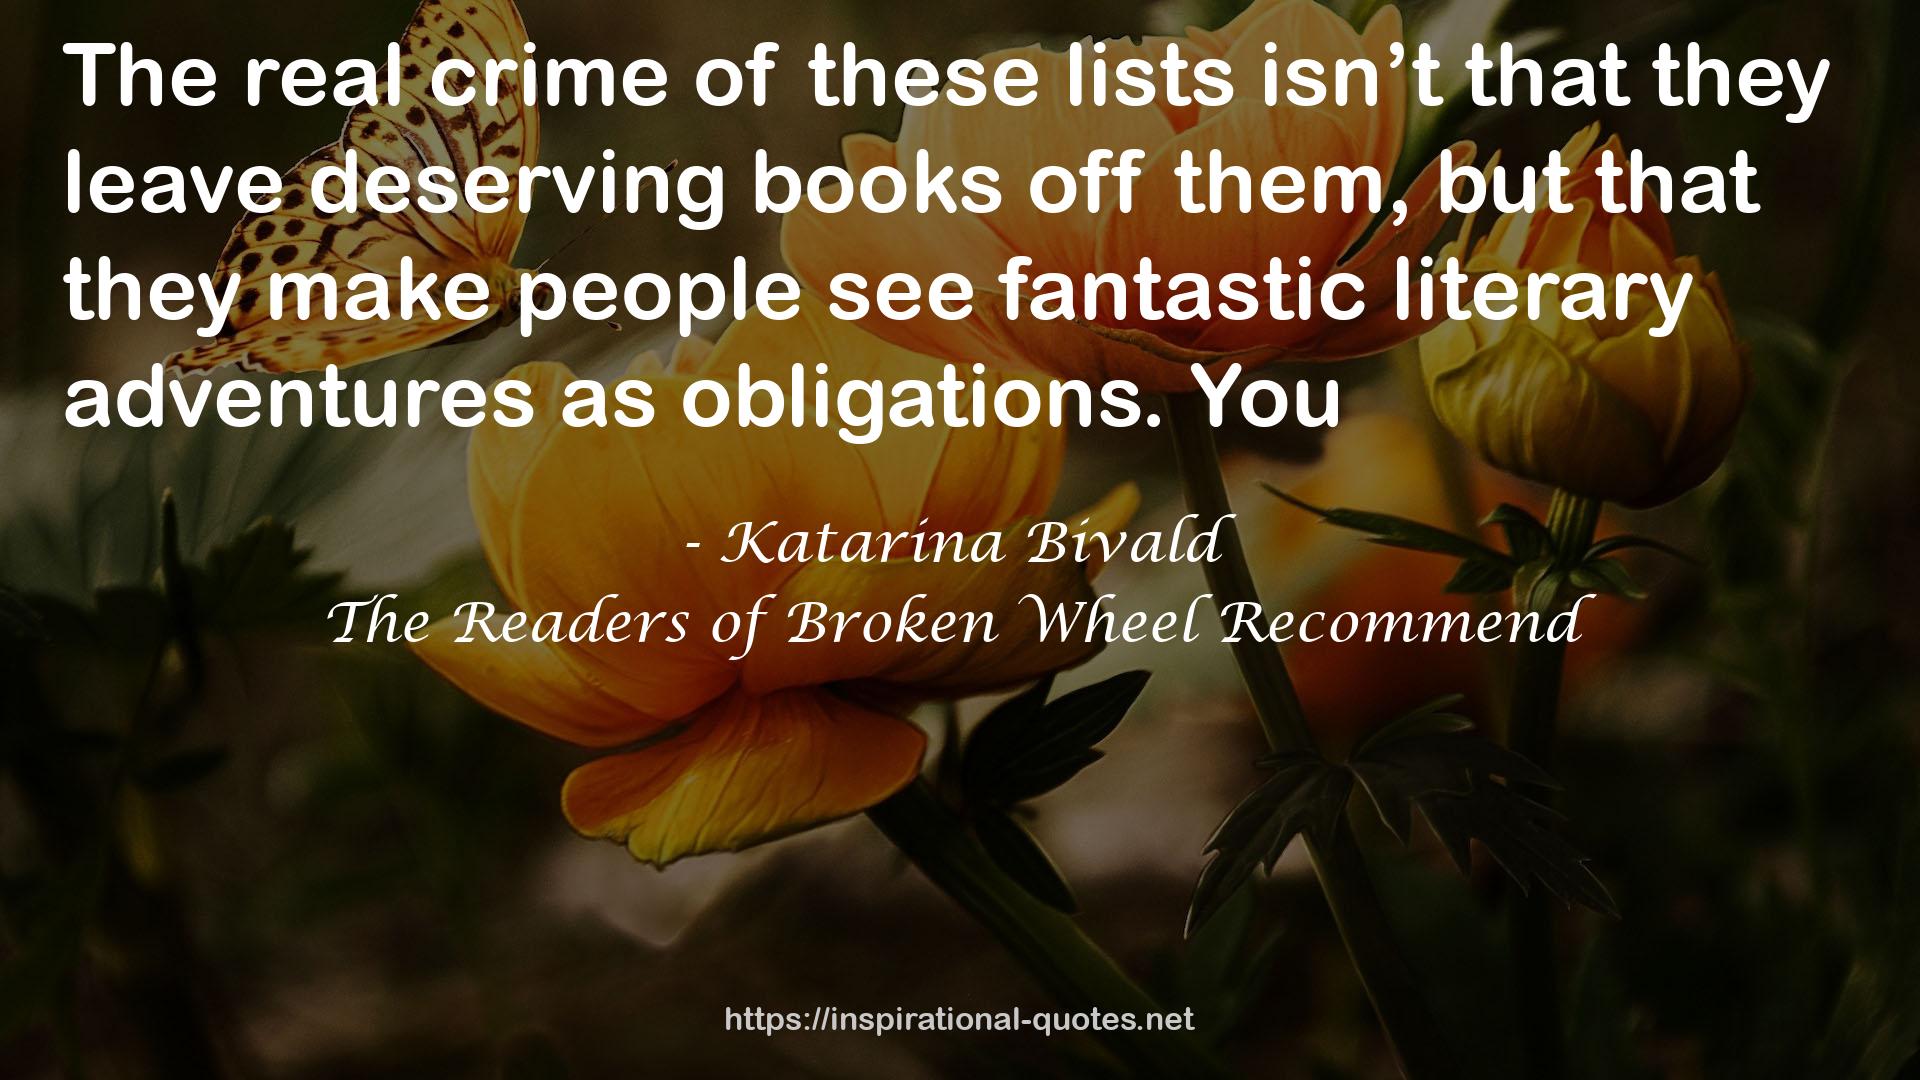 The Readers of Broken Wheel Recommend QUOTES